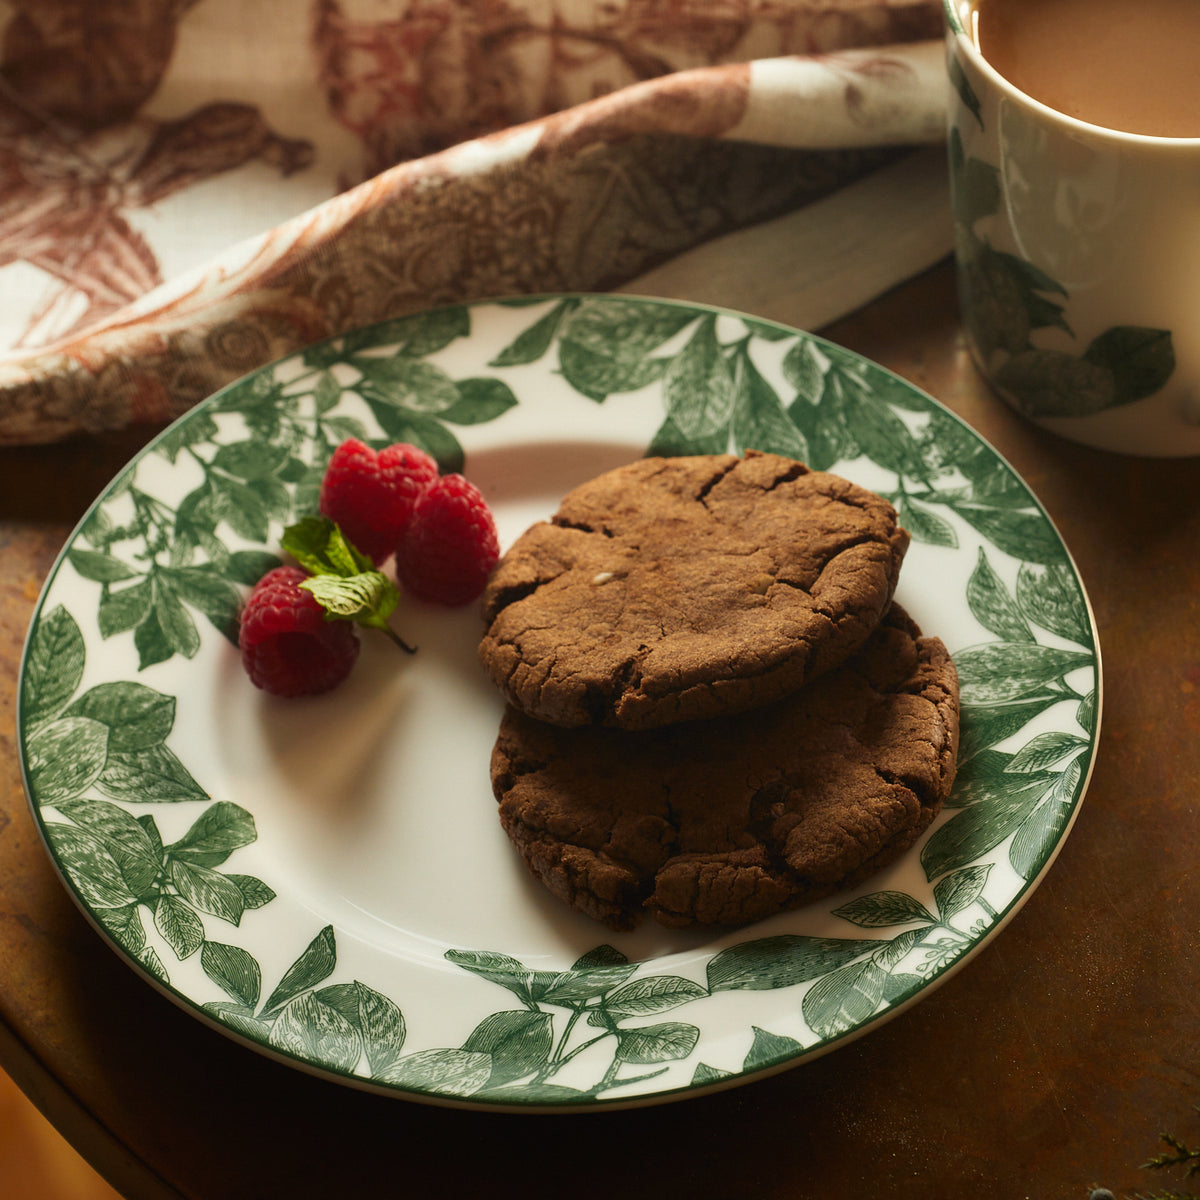 A Caskata Arbor Green Rimmed Salad Plate made from premium porcelain with a green leaf pattern holds two chocolate cookies and a few raspberries, accompanied by a cup of beverage.